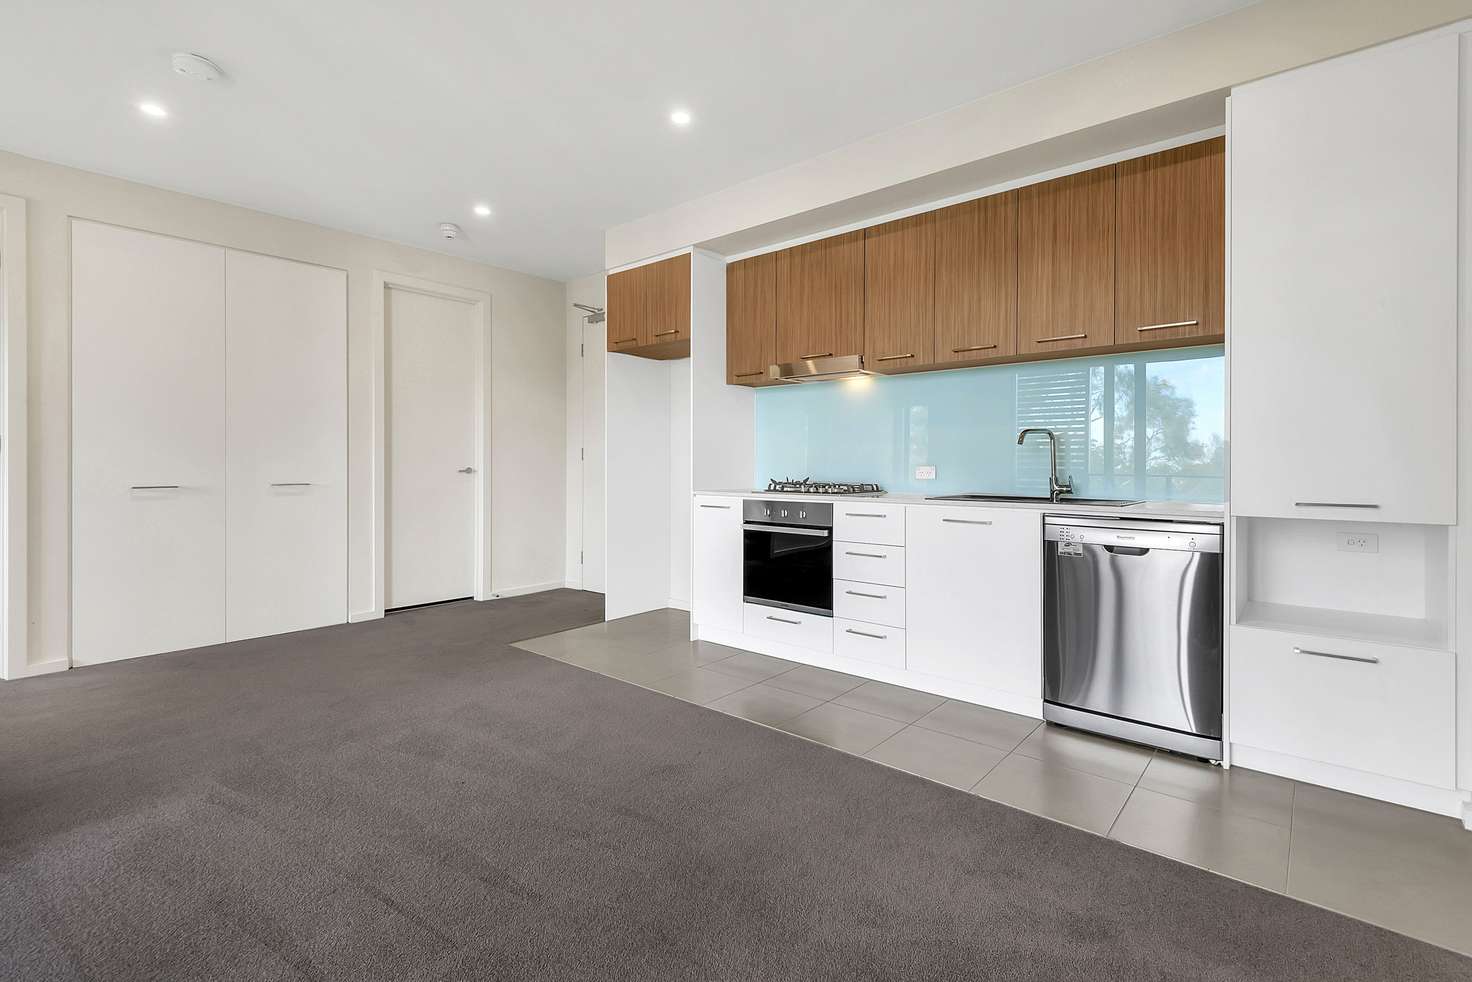 Main view of Homely house listing, 204/79 Janefield Drive, Bundoora VIC 3083